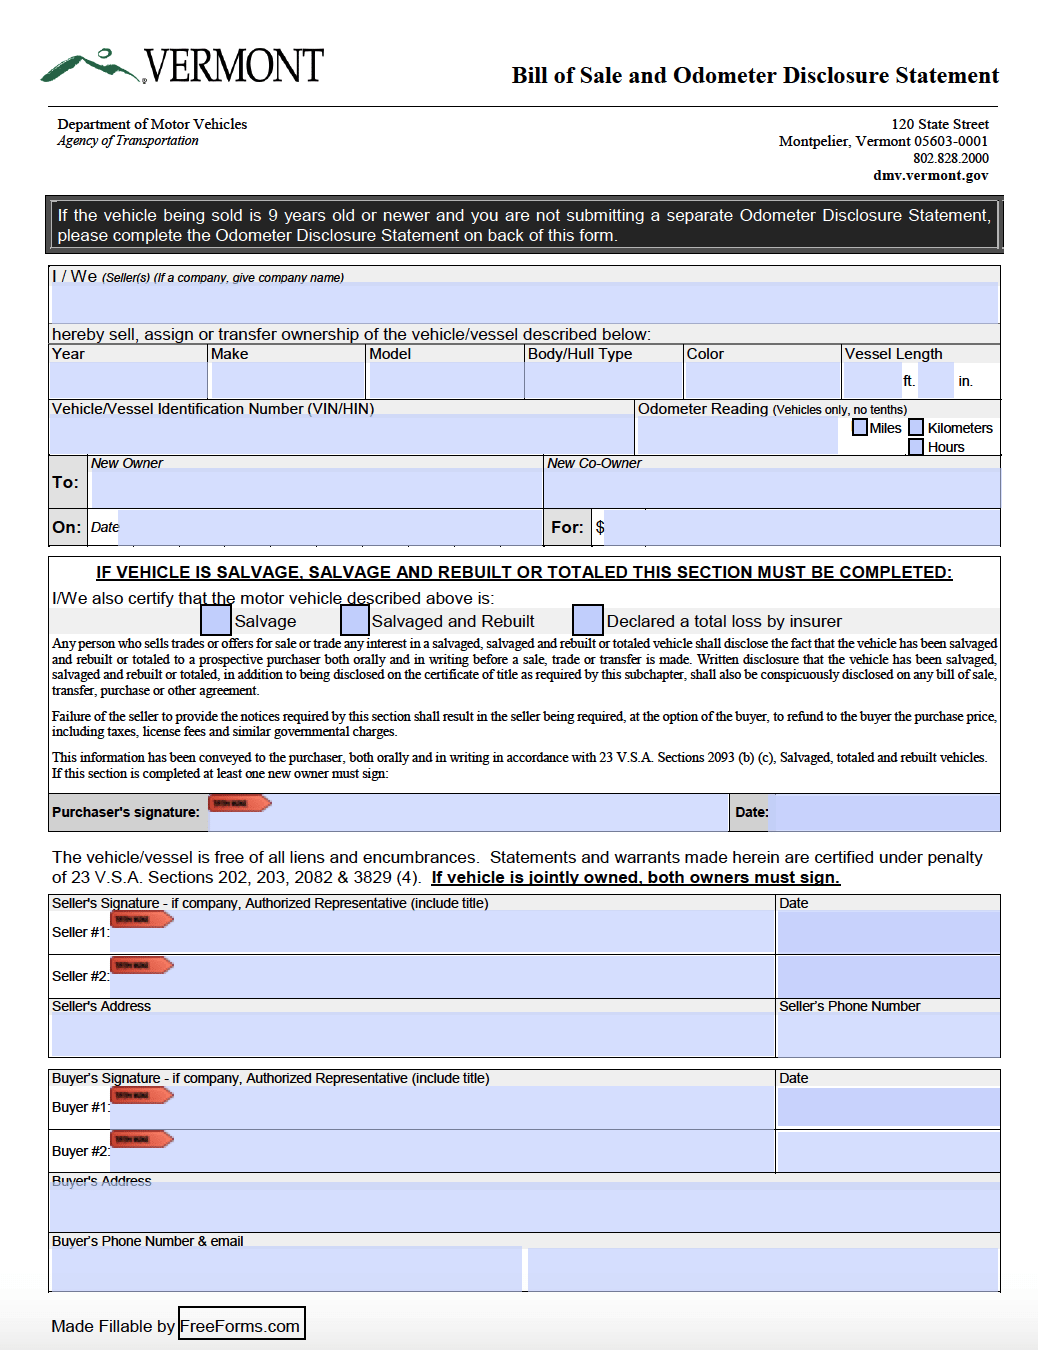 Free Vermont Bill of Sale Forms PDF